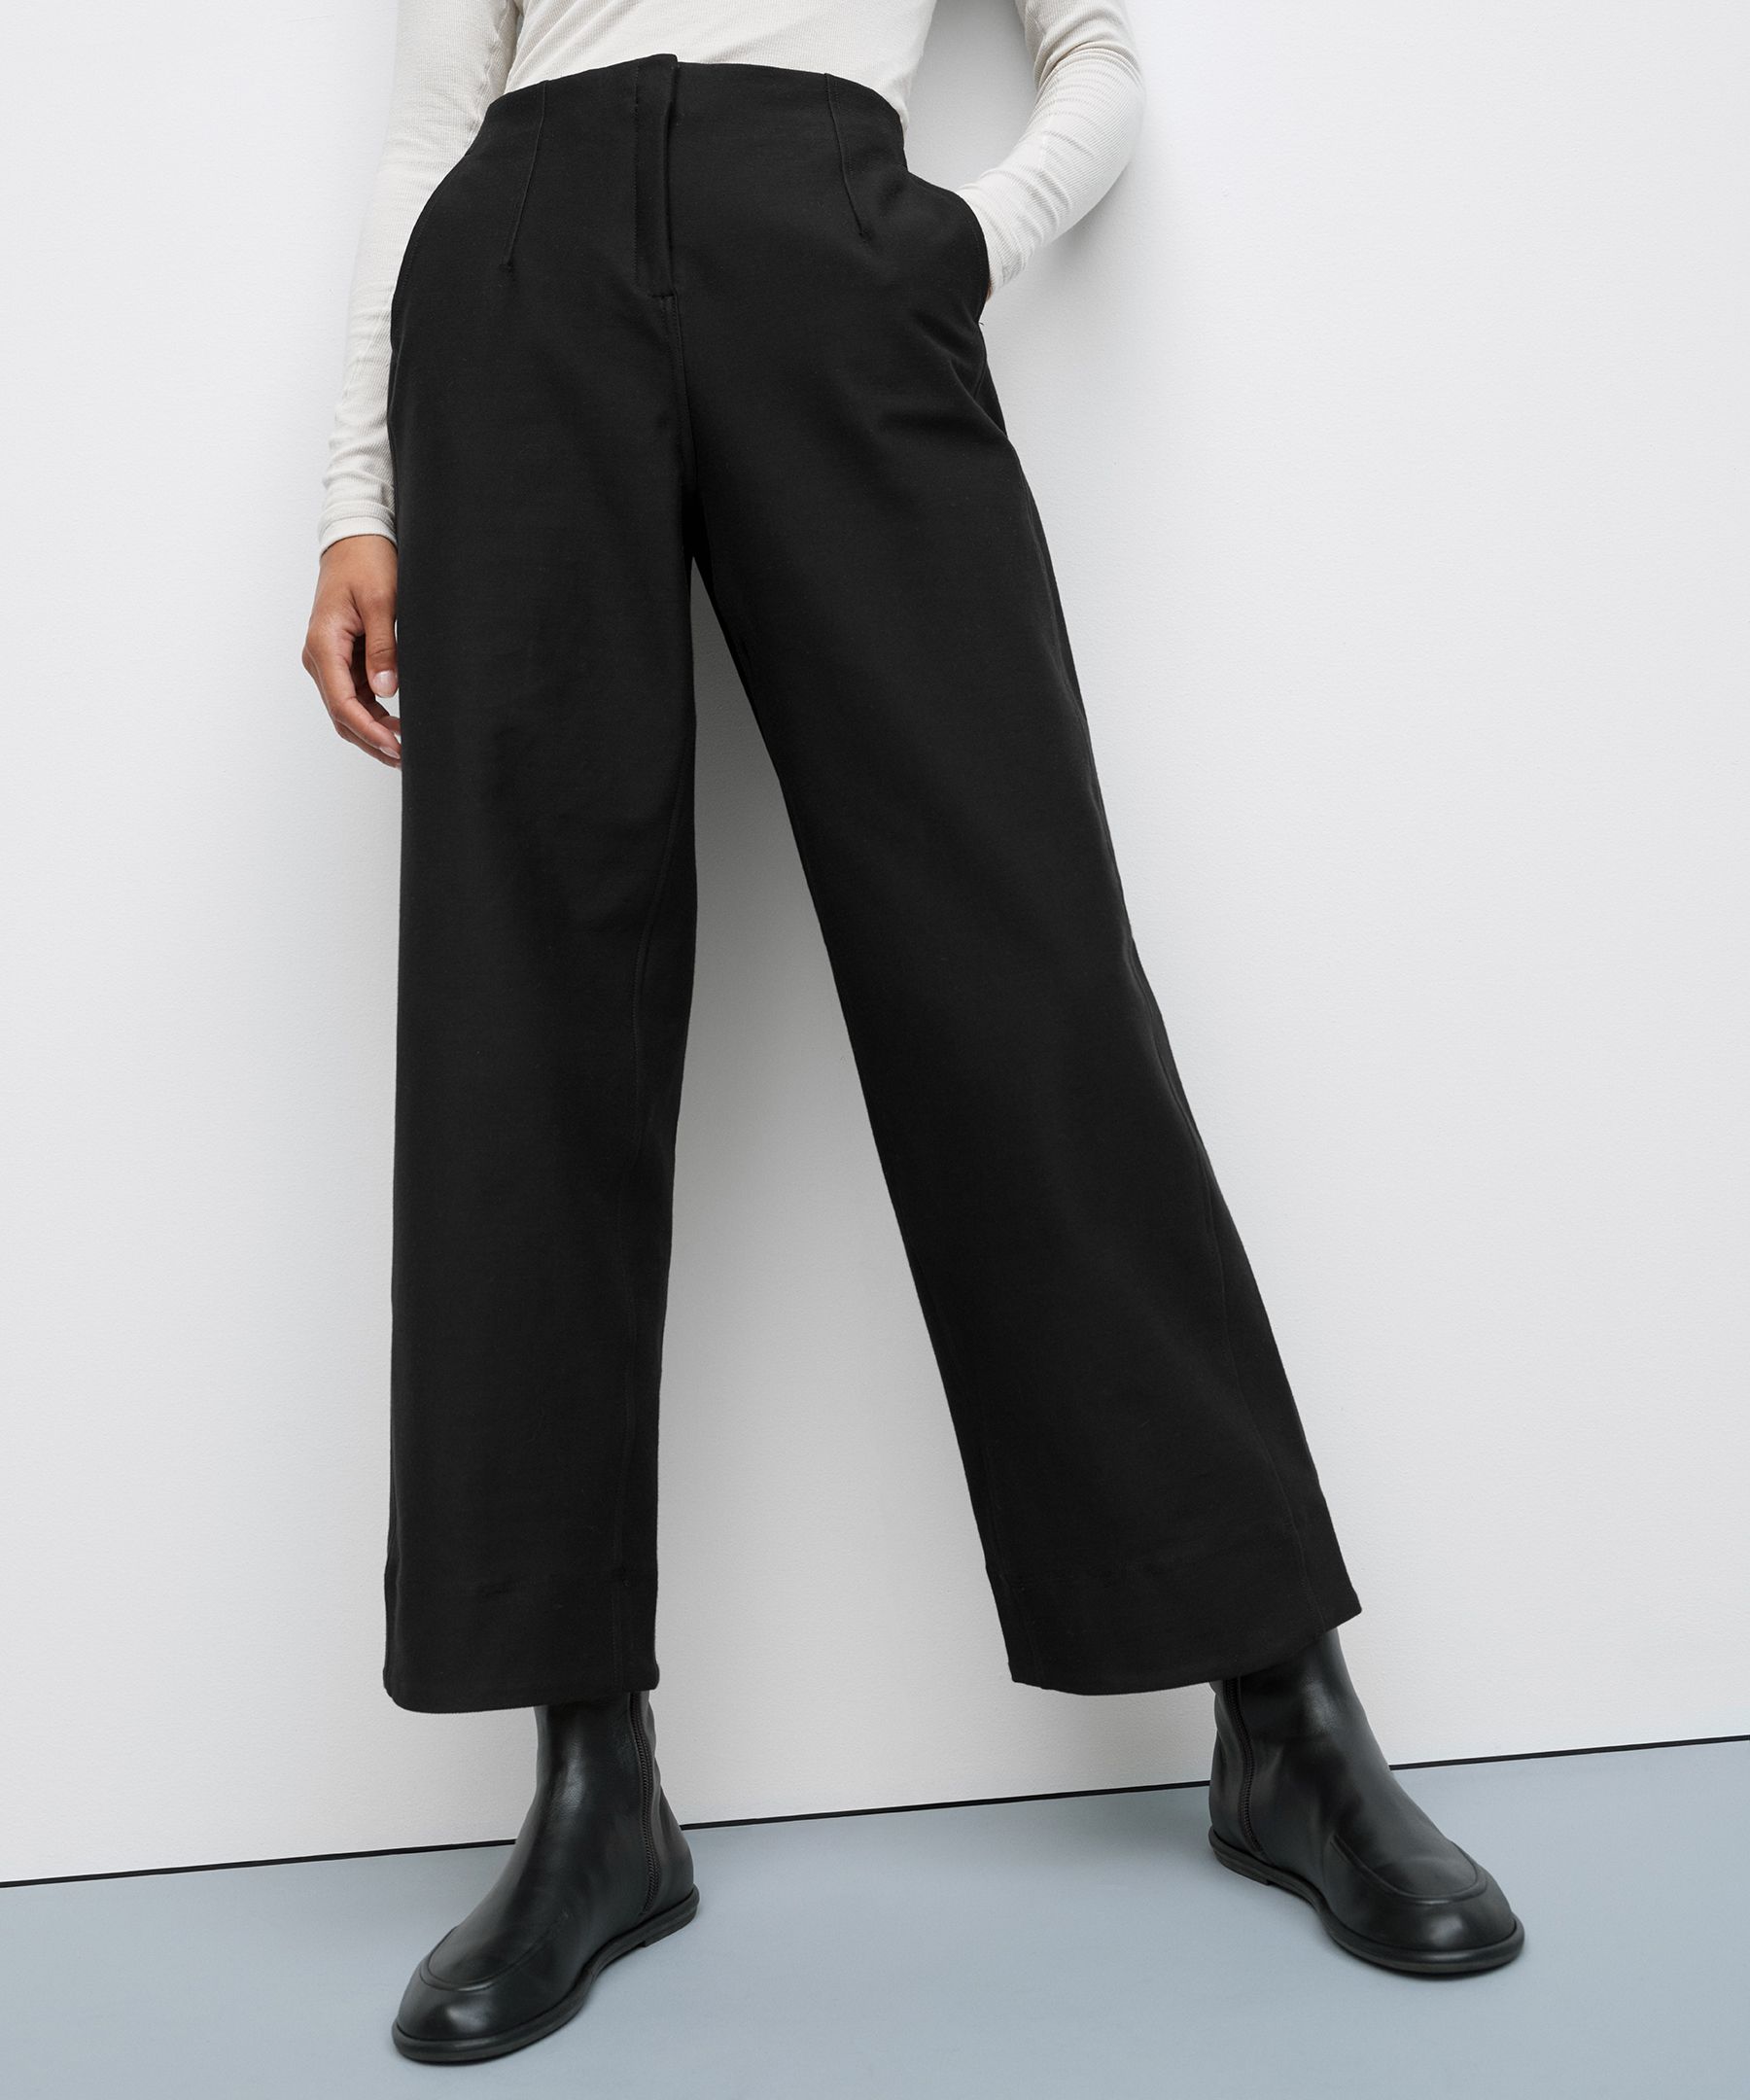 Utilitech Relaxed Mid-Rise Trouser 7/8 Length, Women's Trousers